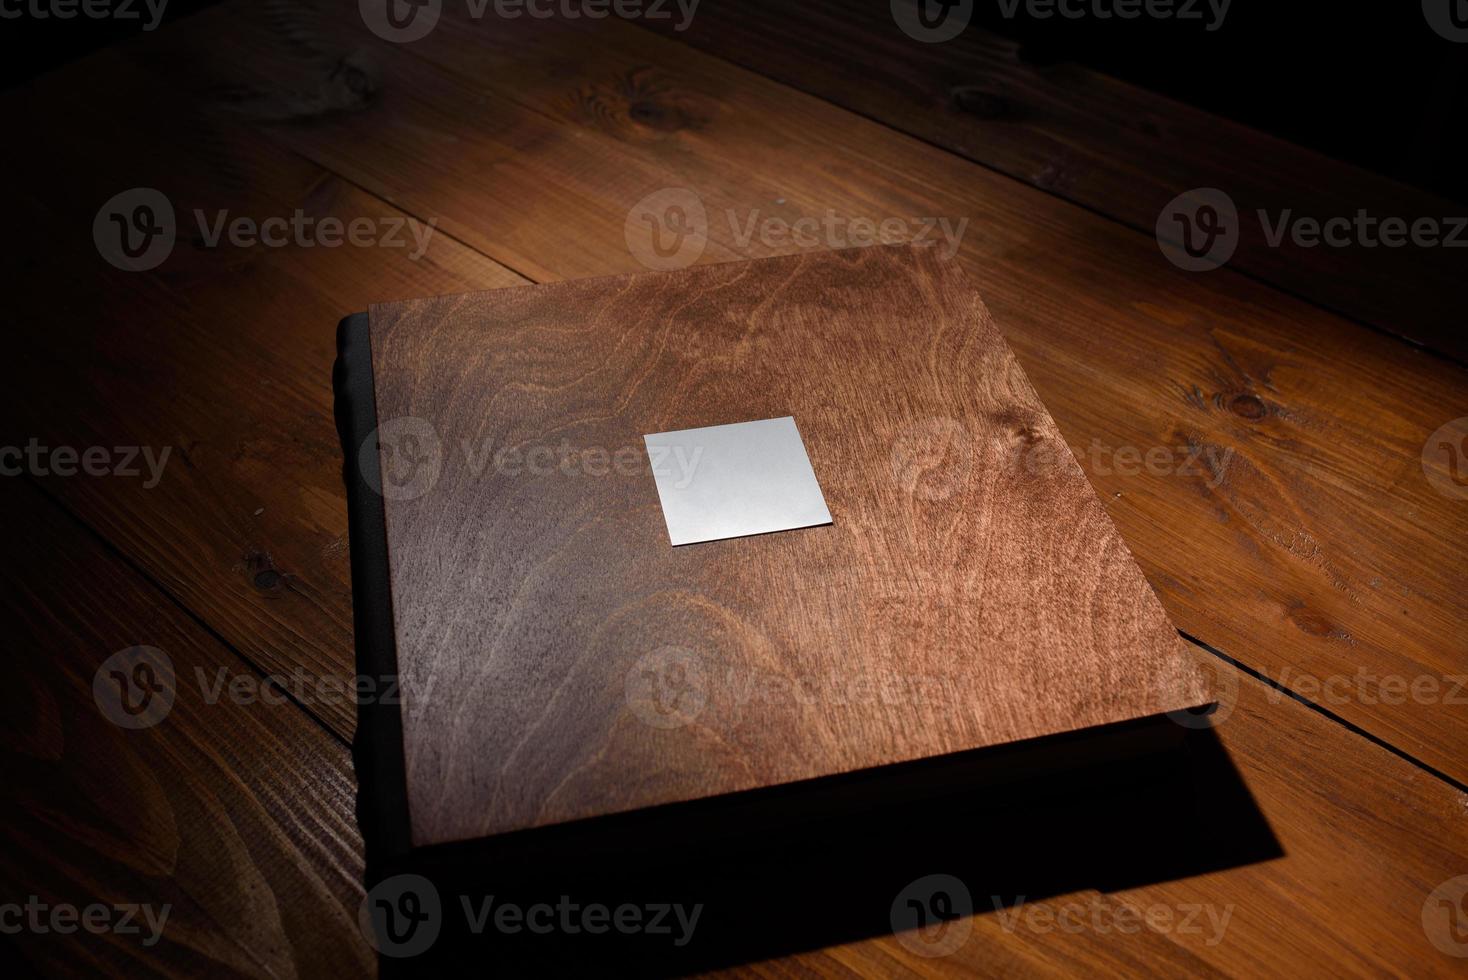 Photo book in a wooden cover on a wooden table. Hard light